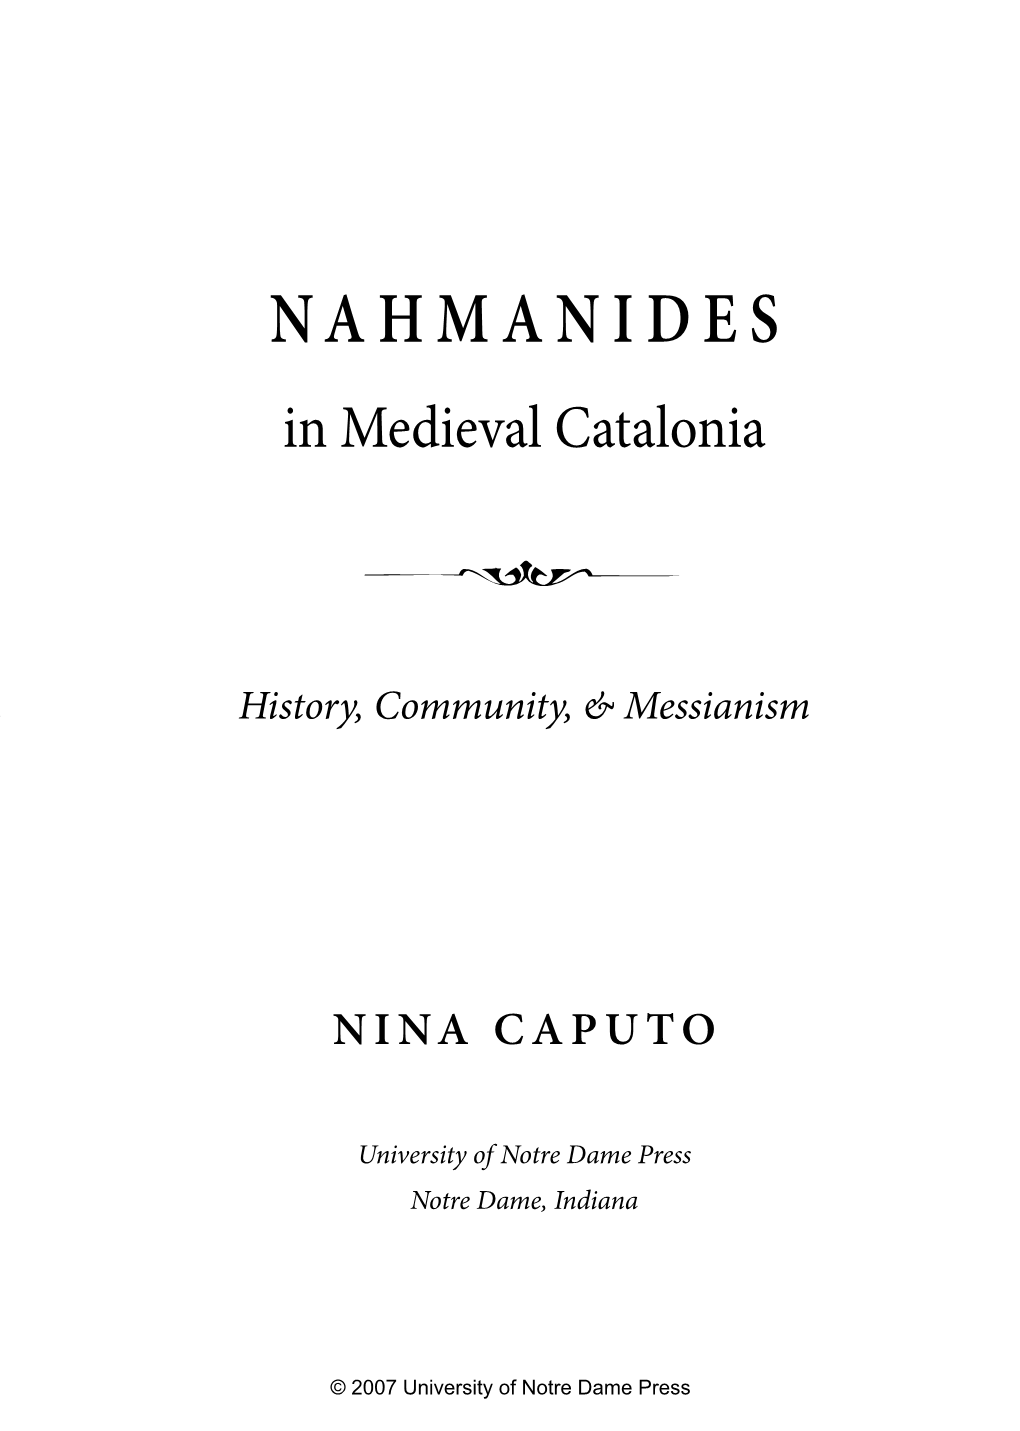 NAHMANIDES in Medieval Catalonia 5 History, Community, & Messianism